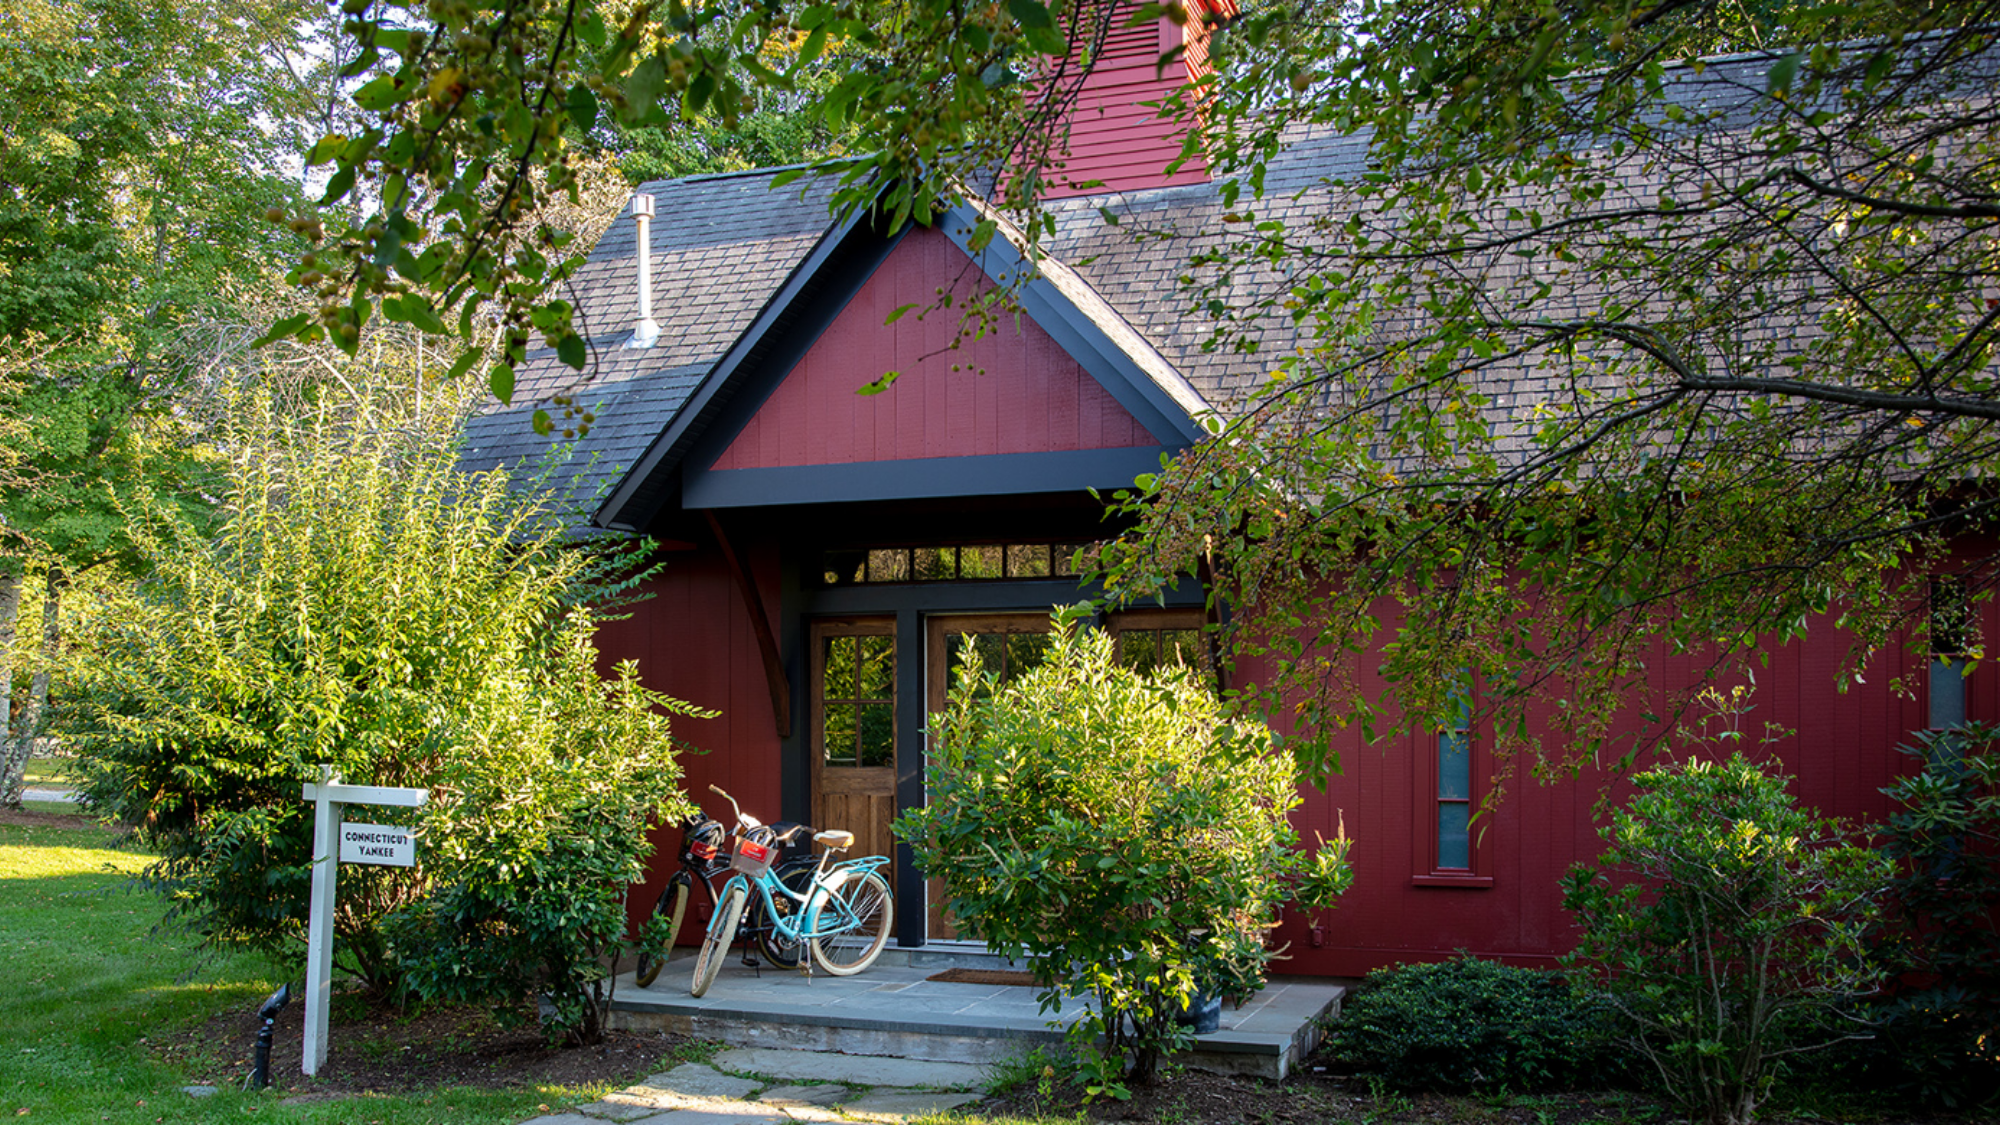 Exterior of the Connecticut Yankee Cottage at Winvian Farm with bicycles on the porch.